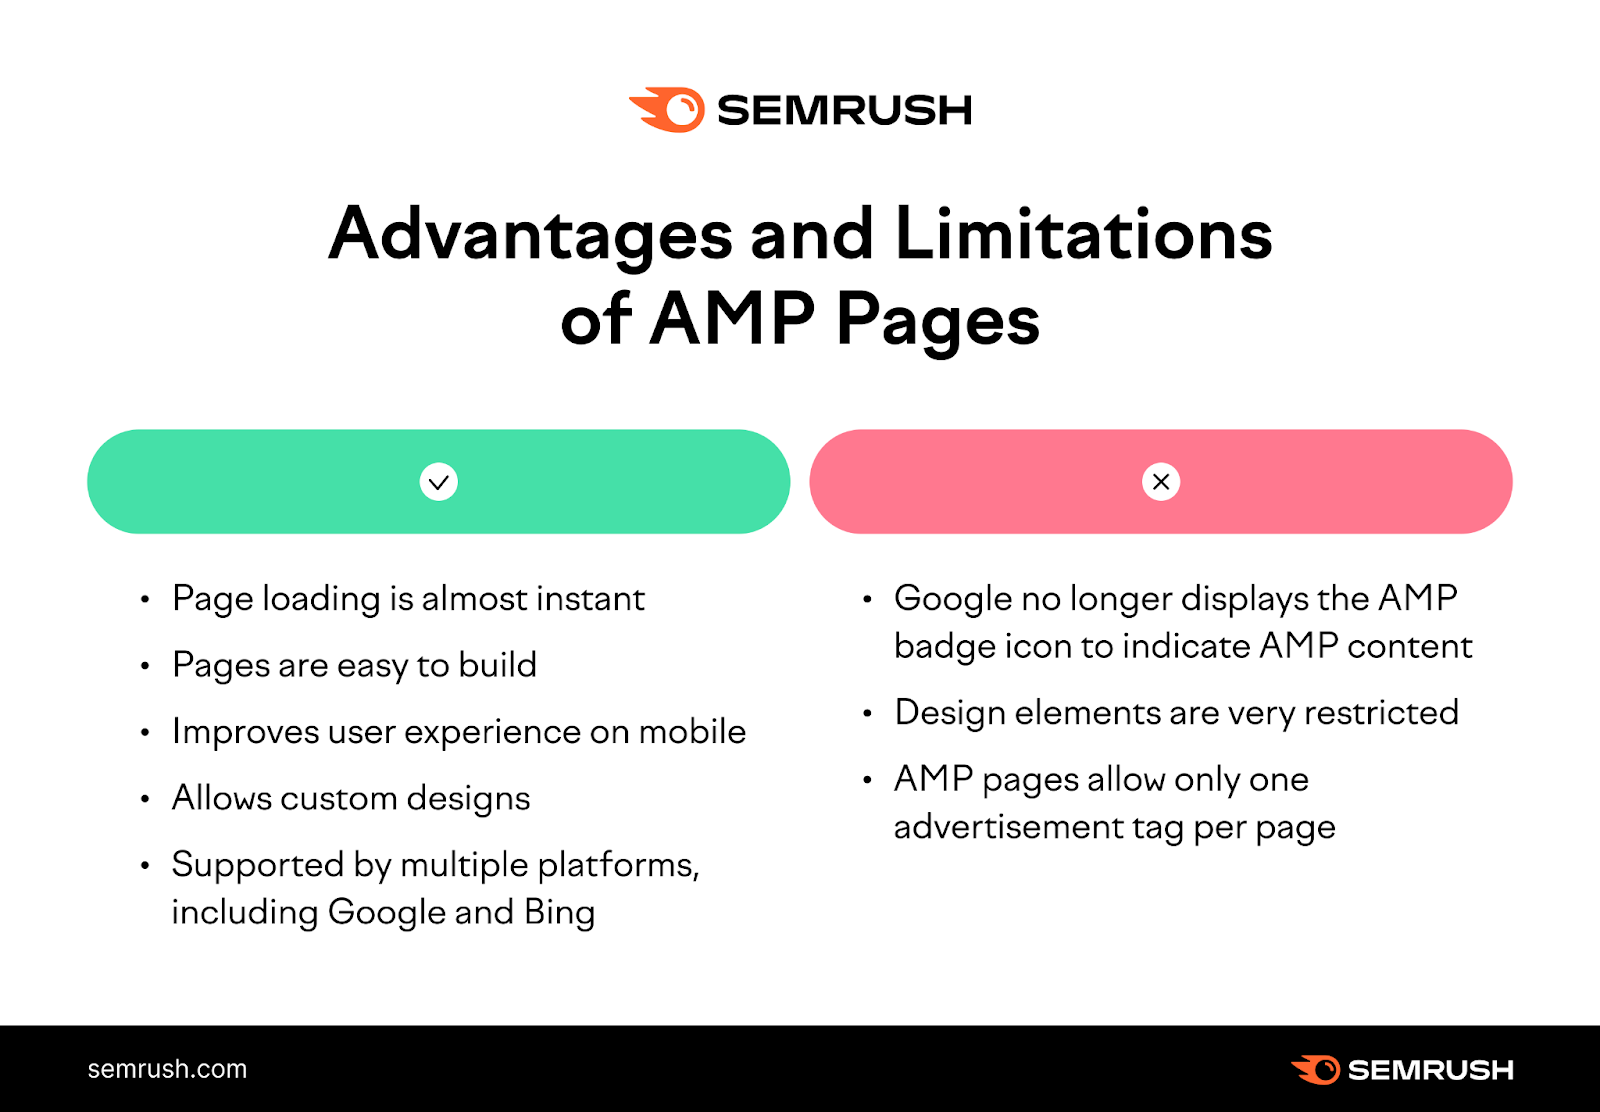 Advantages and Limitations of AMP Pages infographic